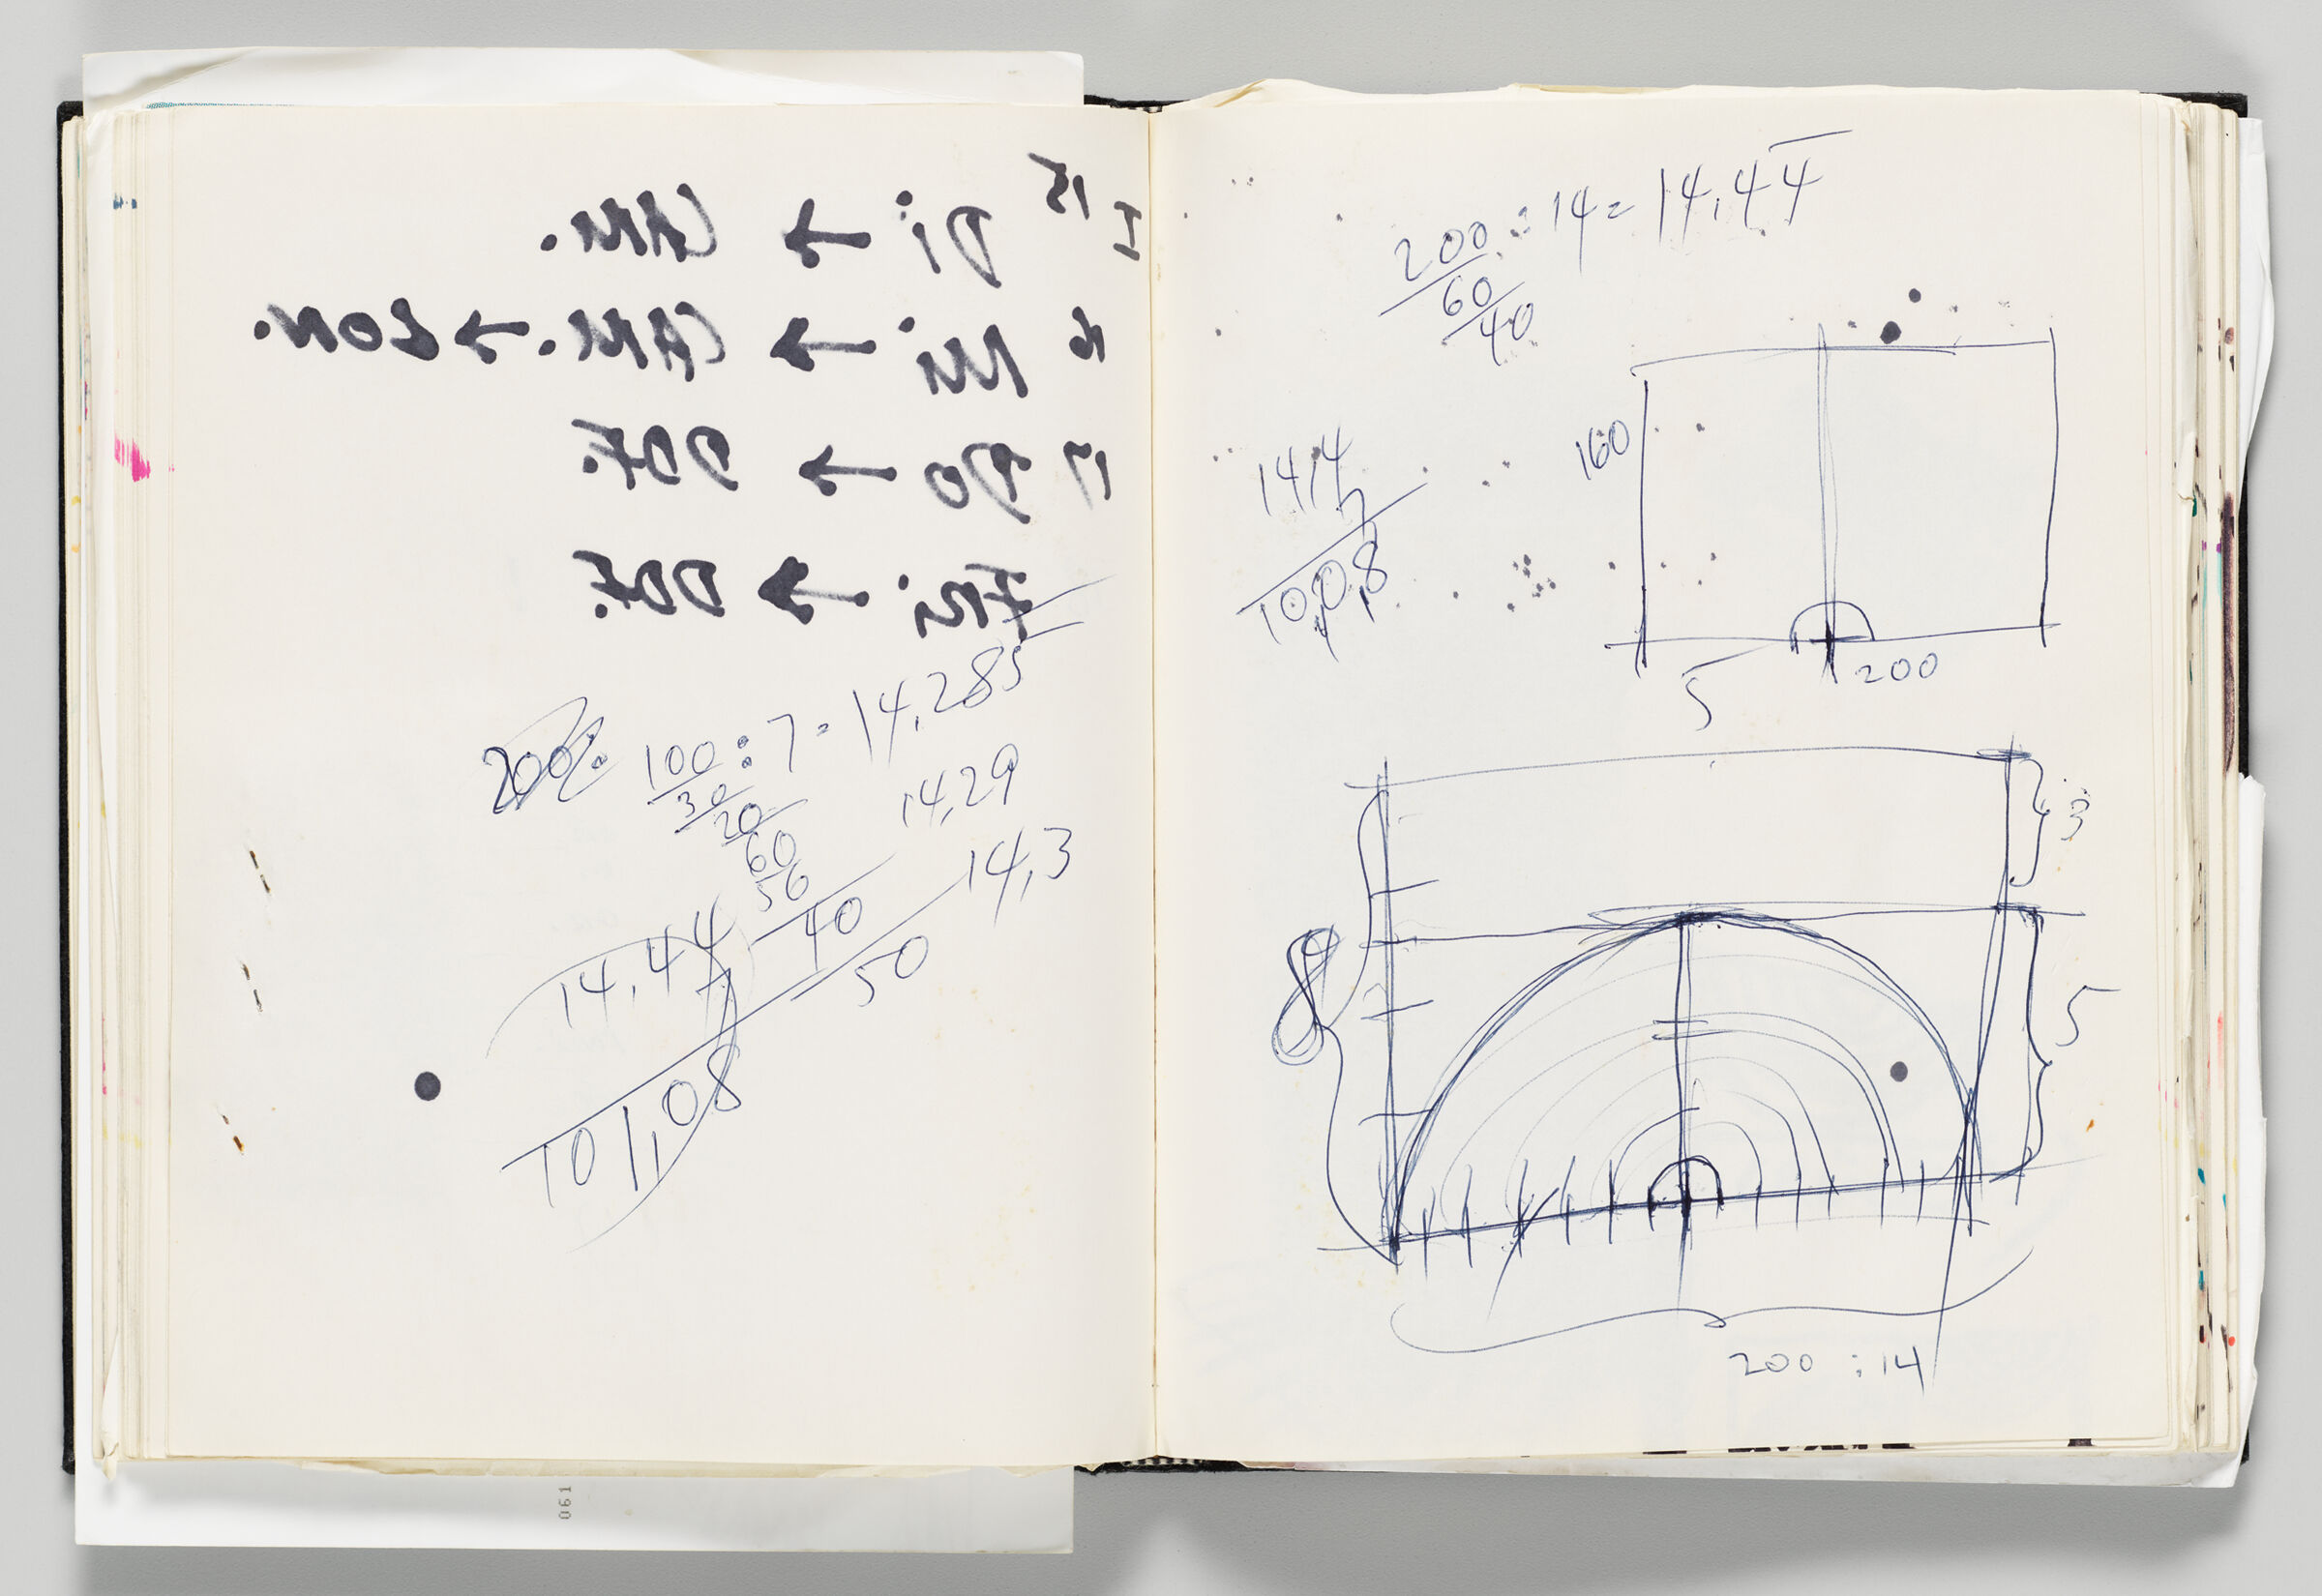 Untitled (Calculations And Bleed-Through Of Previous Page, Left Page); Untitled (Calculations For Rainbow Design, Right Page)